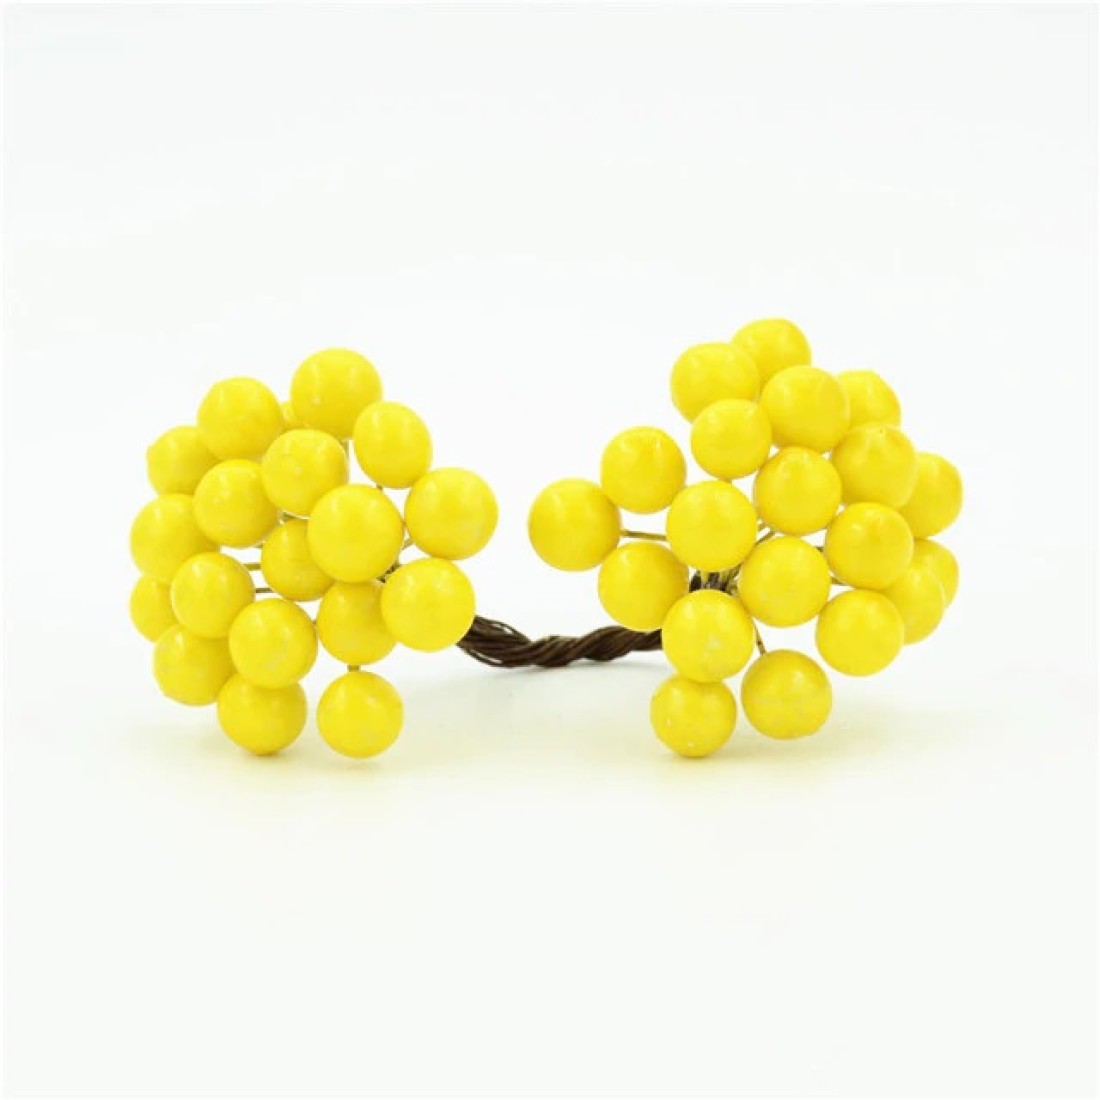 Craftyscrappers HOLLY BERRY POLLENS - YELLOW